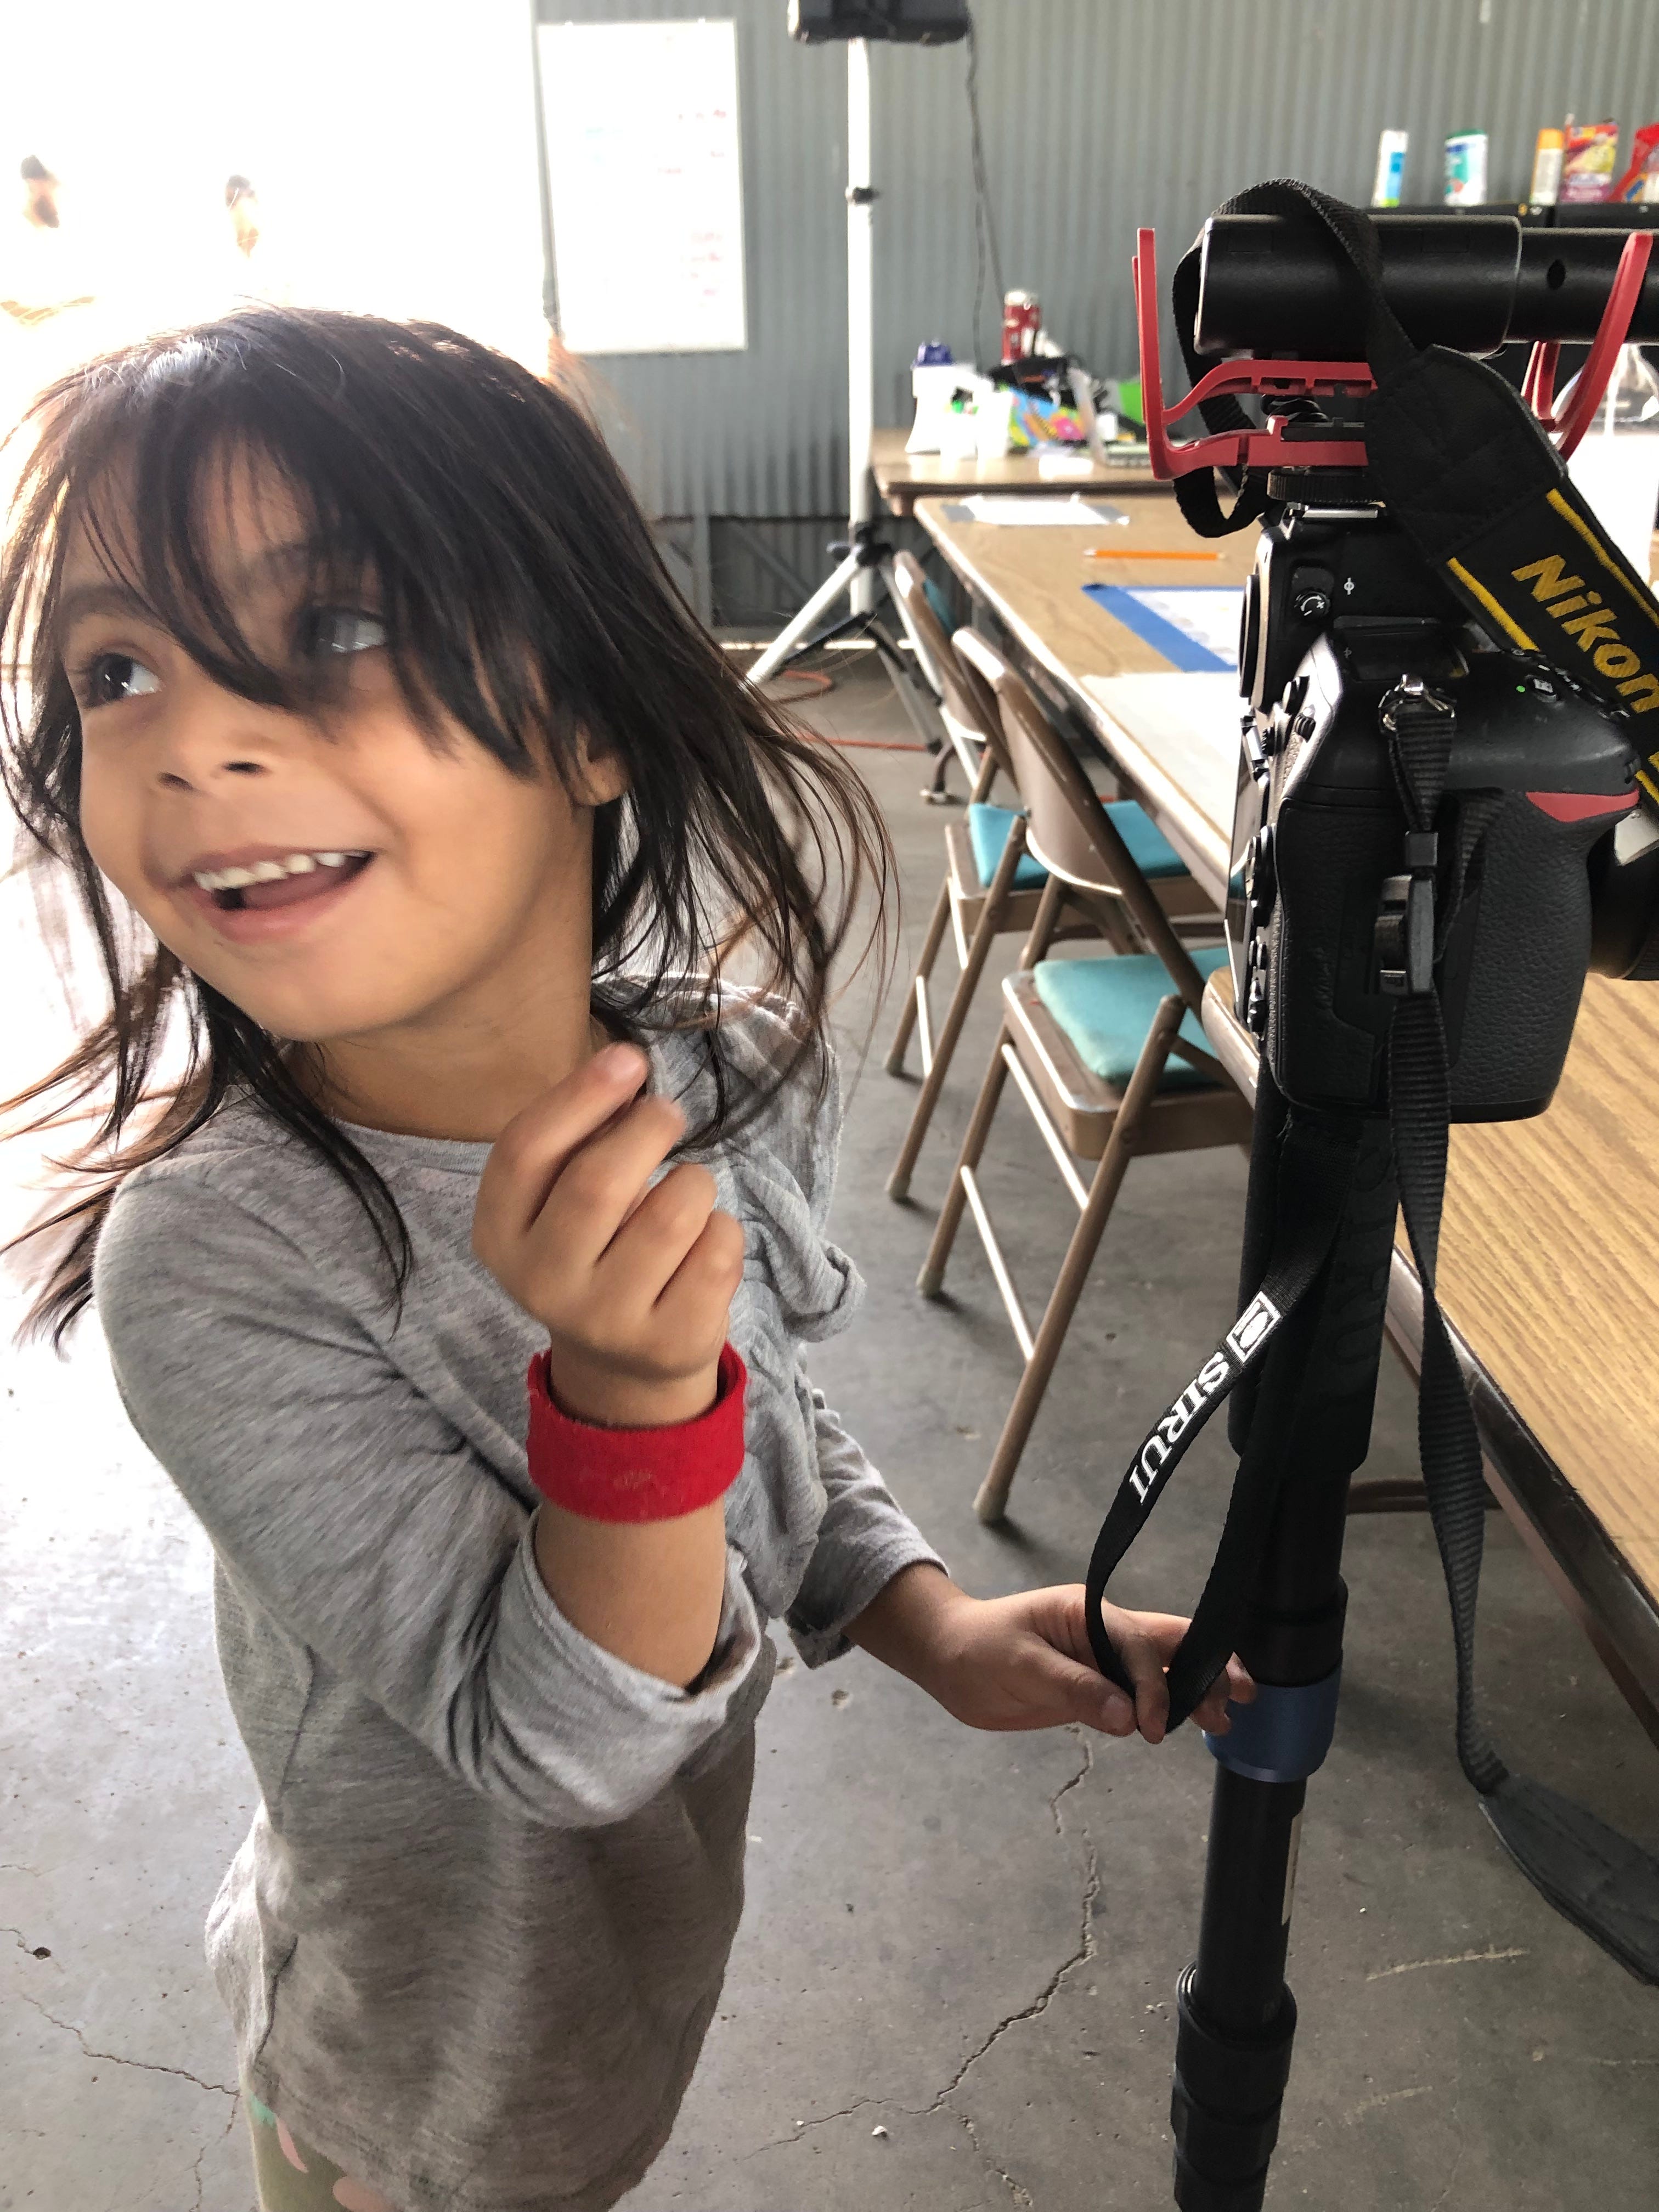 DEMING, N.M. – A migrant child plays with the camera of visual journalist Annie Rice at a migrant shelter in Deming, N.M.